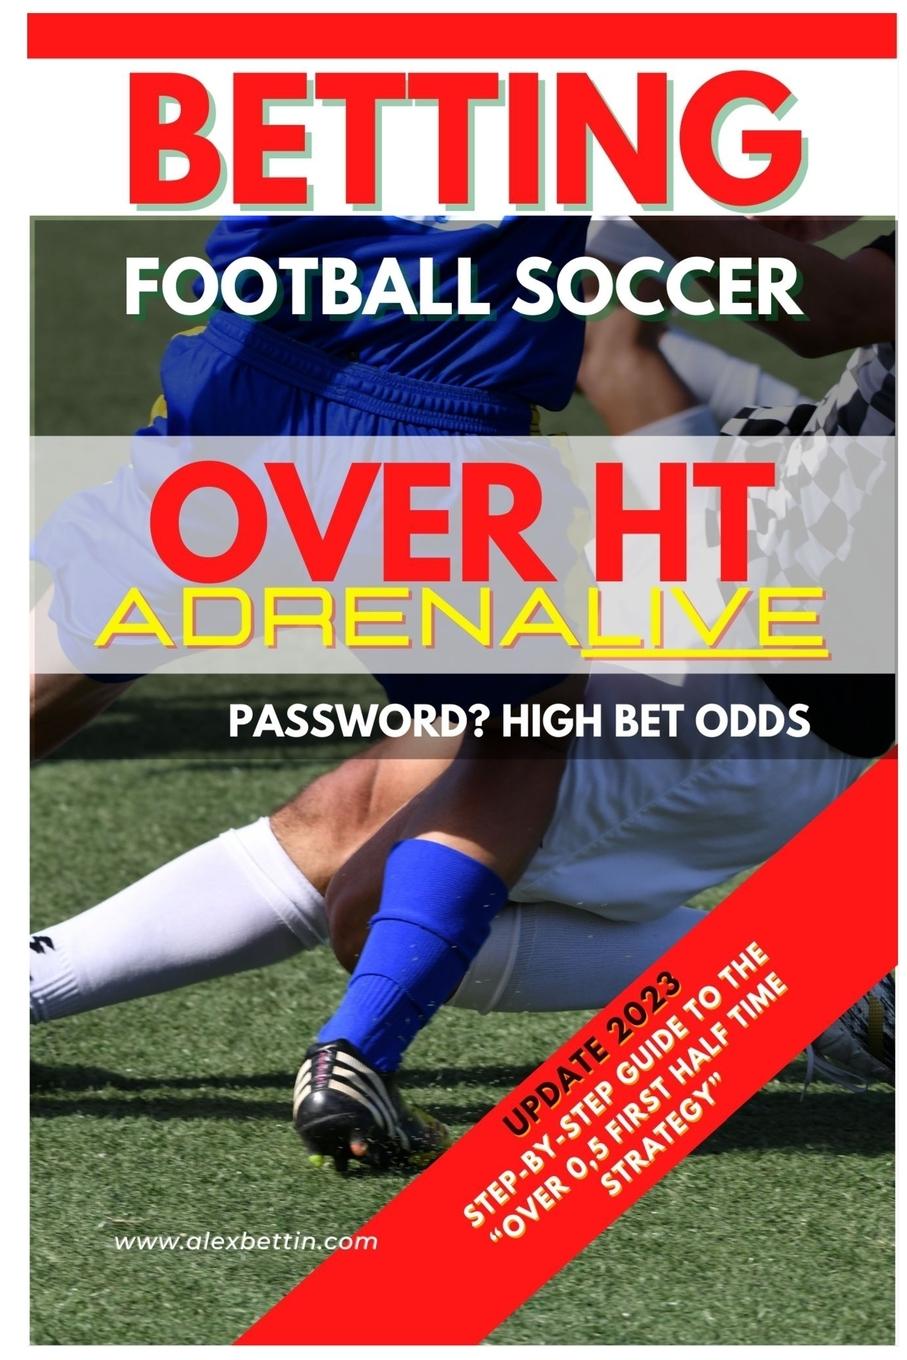 Book Betting Football Soccer Over 0,5 ADRENALIVE 